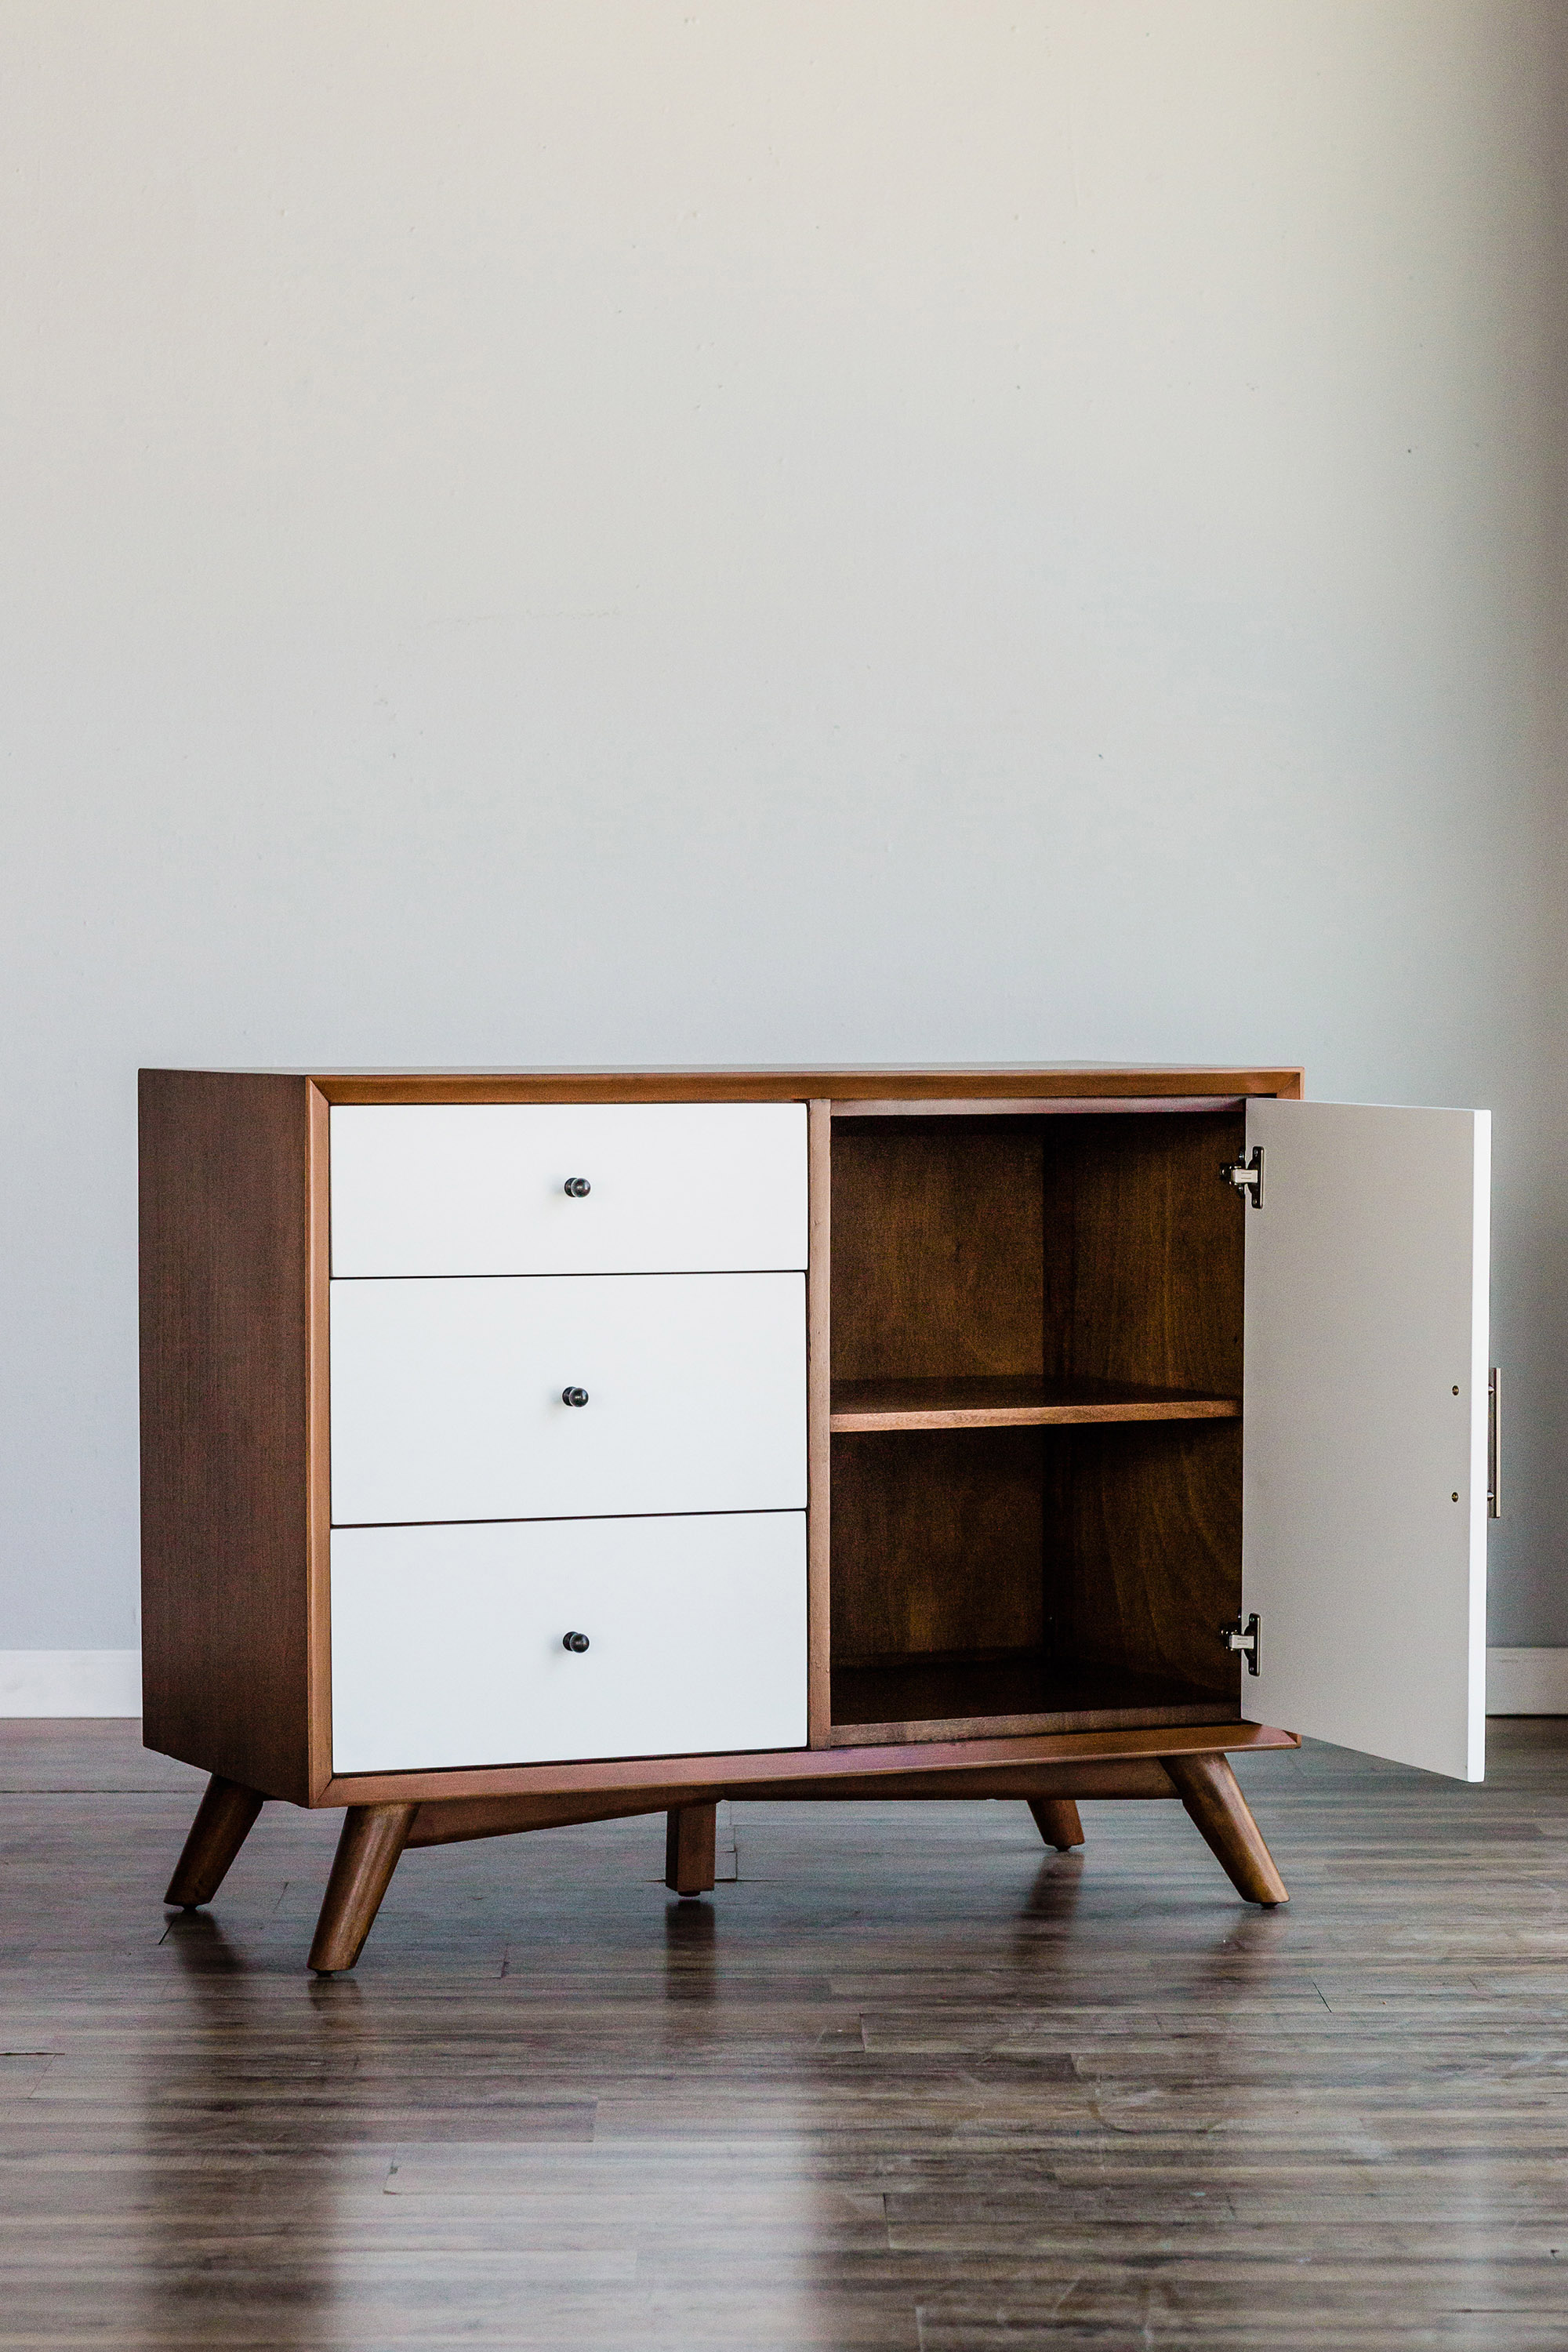 Alpine Furniture Flynn Accent Cabinet, Acorn/White - image 2 of 3